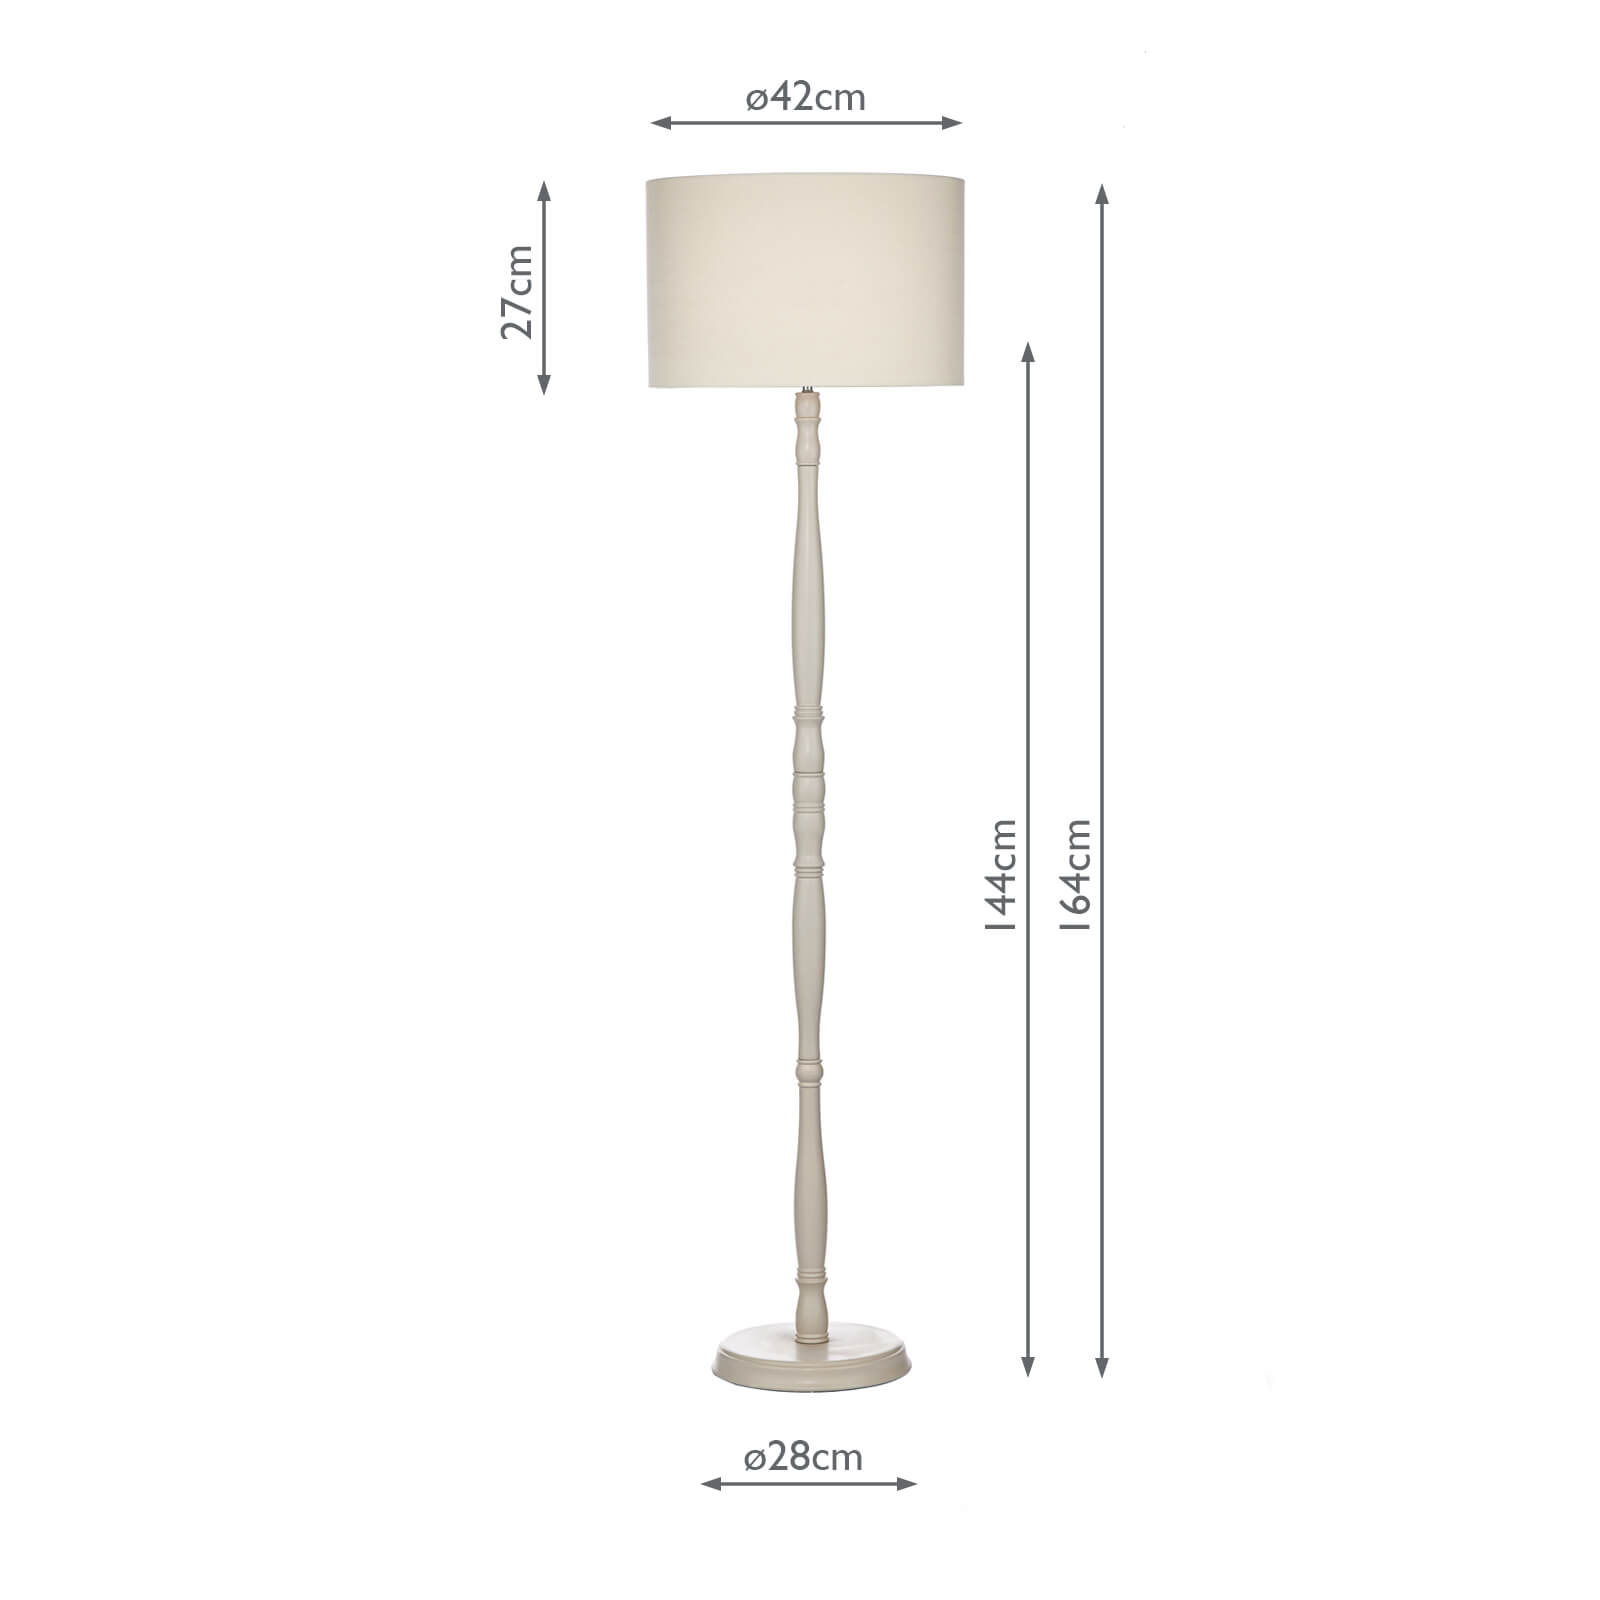 Dunlop Floor Lamp Cream Complete With Shade, How To Measure For A Floor Lamp Shade